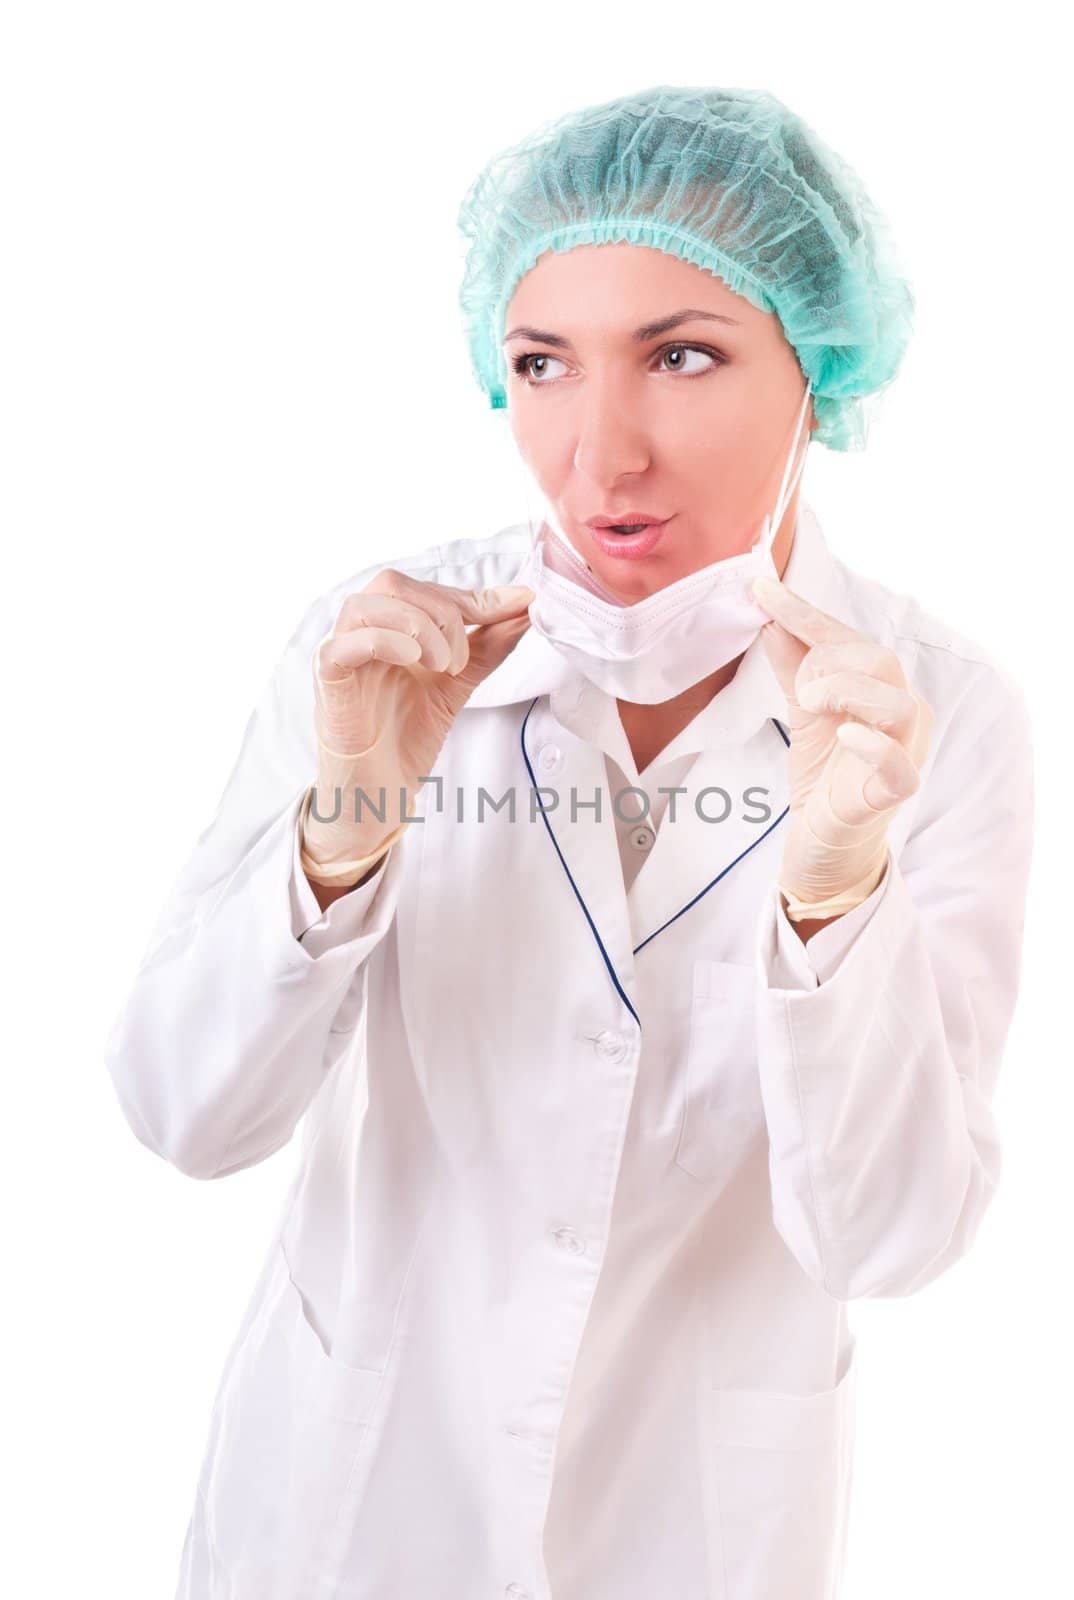 Surprised woman in medical uniform isolated on white background